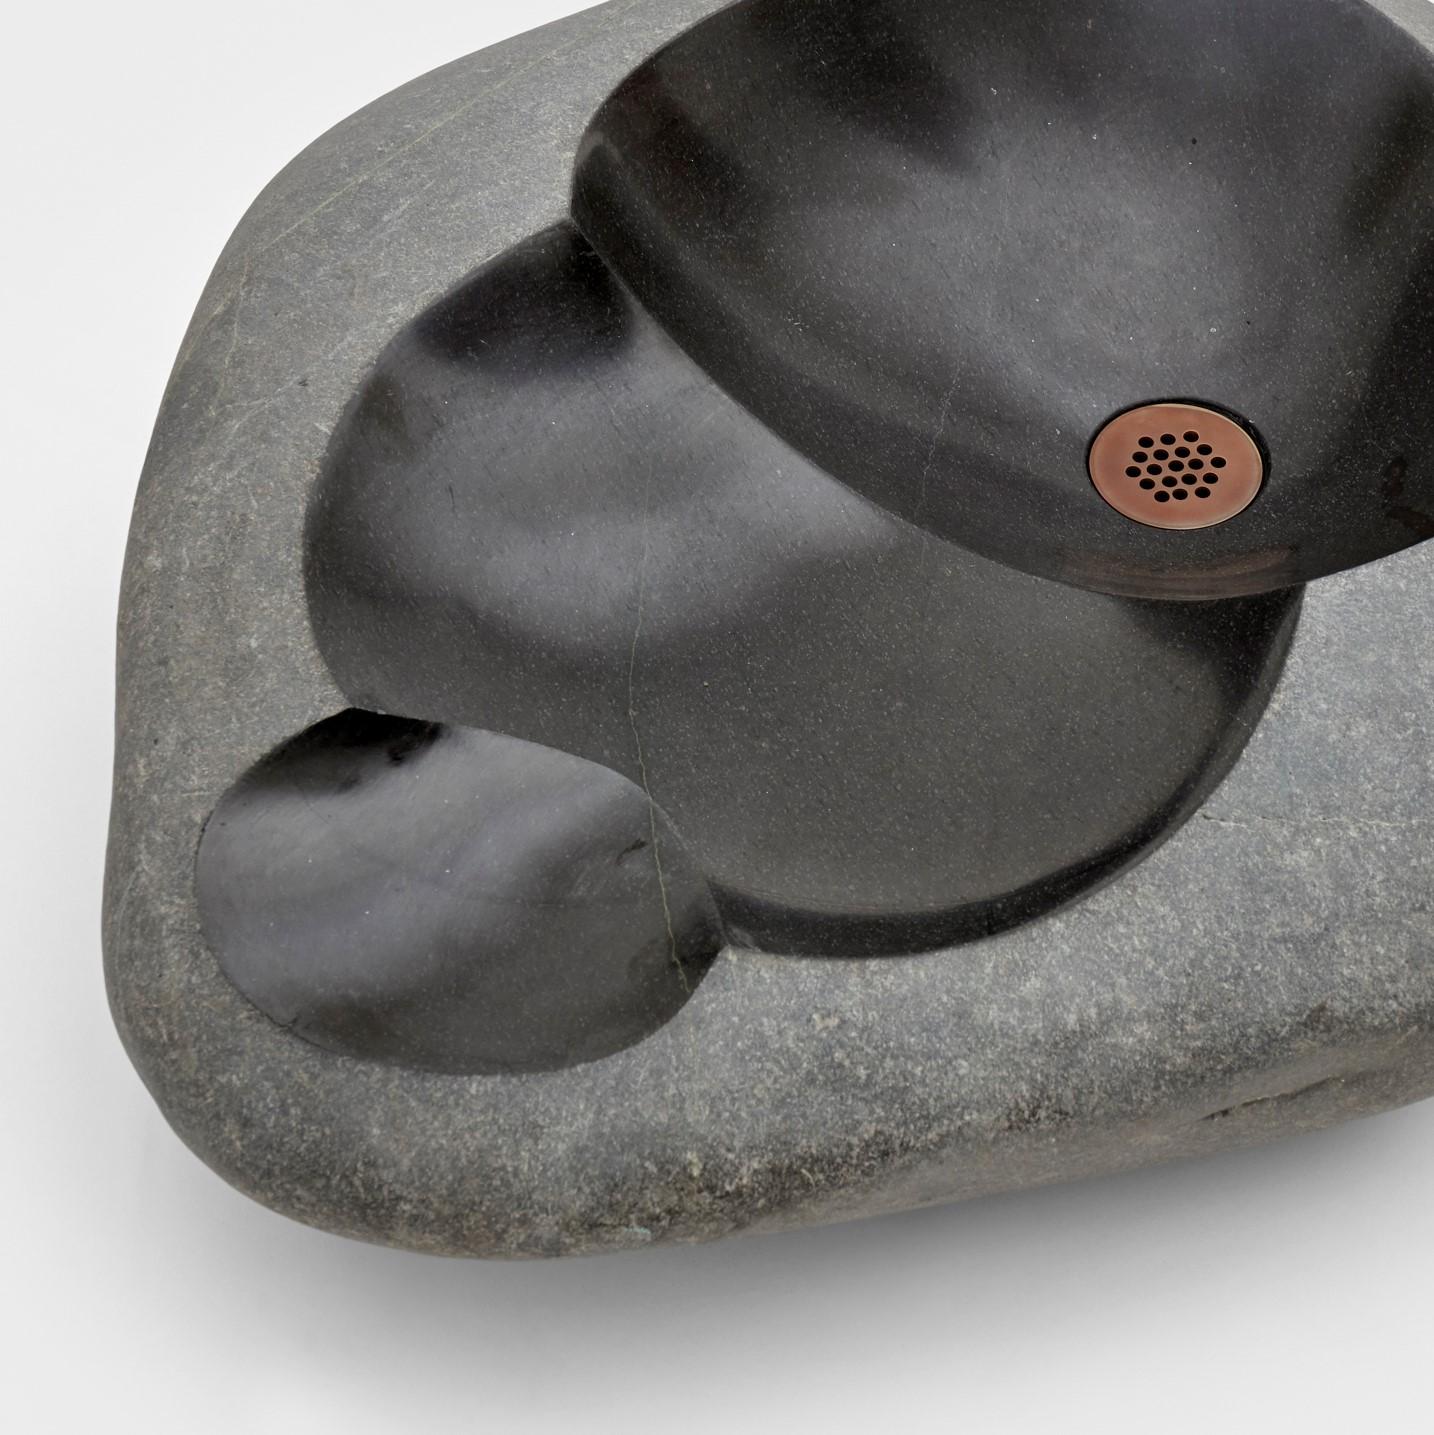 Rimac stones N°3 by Estudio Rafael Freyre.
Dimensions: W 70 D 47 x H 17 cm.
Materials: river stones.

Rimac Stones explores our hydrographic landscape and its interaction with the materiality of our territory. The water we use daily connects us